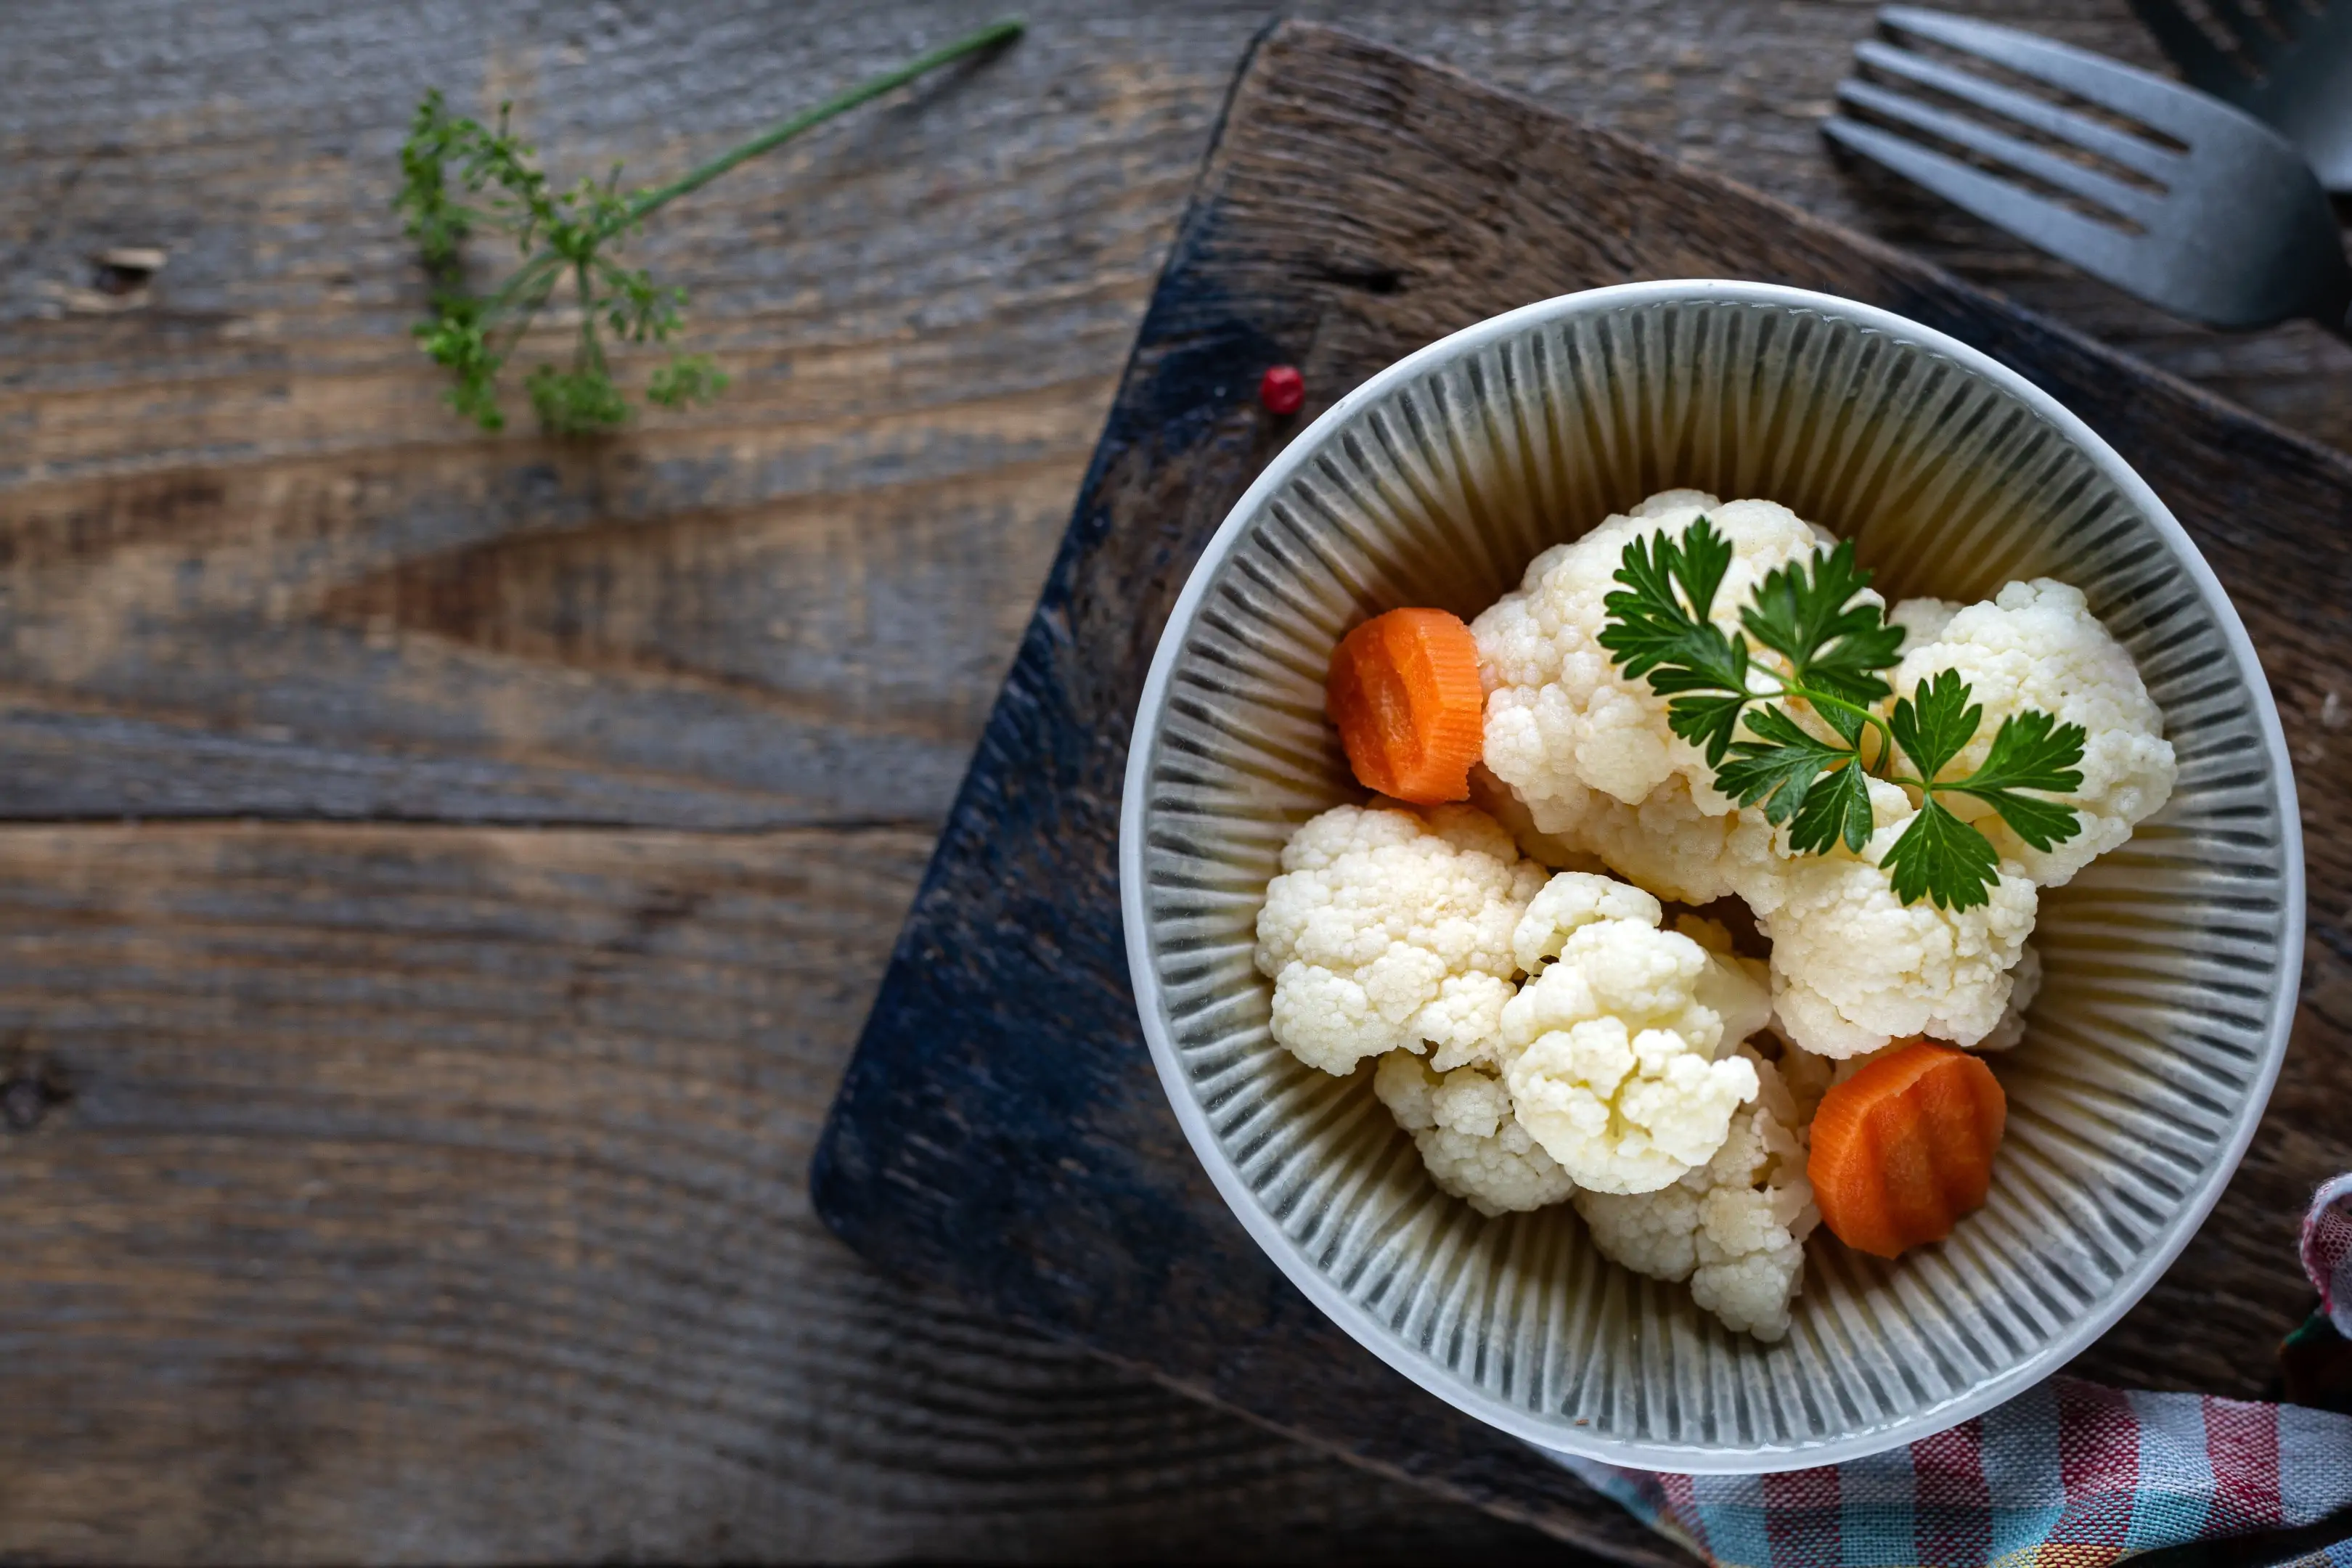 Fermented cauliflower with carrots in a ceramic plate on wooden table - top view